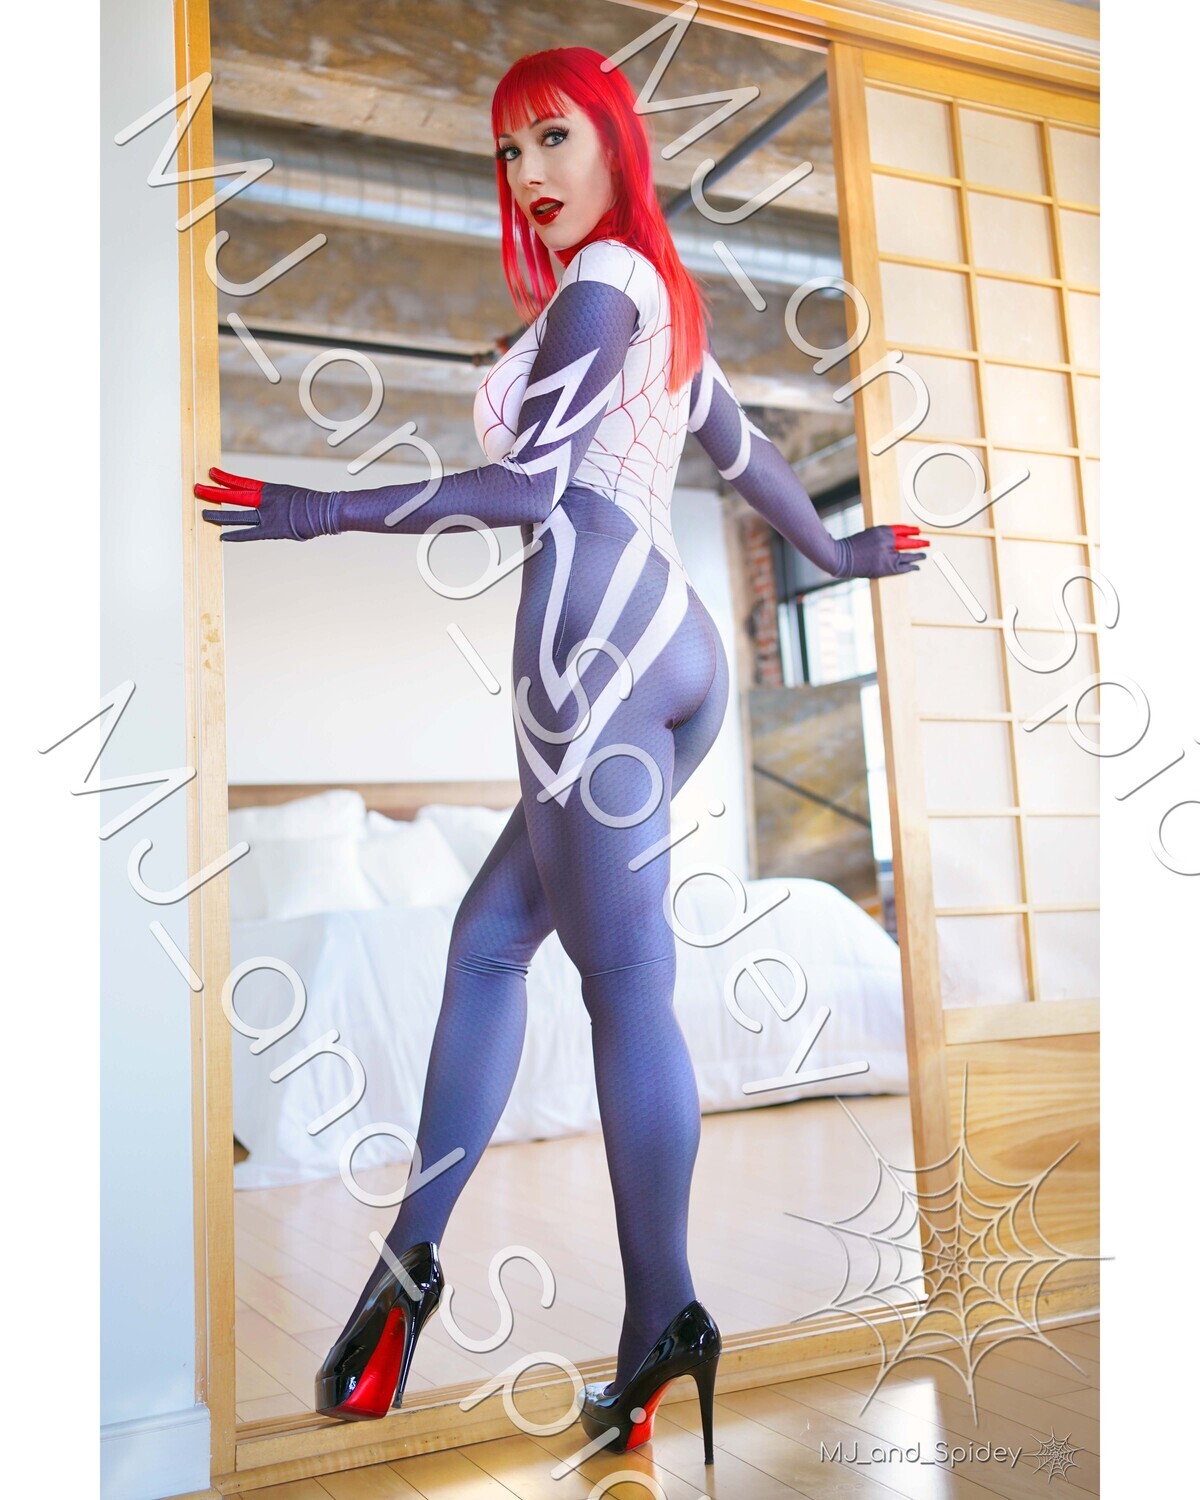 Marvel - Spider-Man - Mary Jane Watson - Silk 4 - Digital Cosplay Image (@MJ_and_Spidey, MJ and Spidey, Comics)